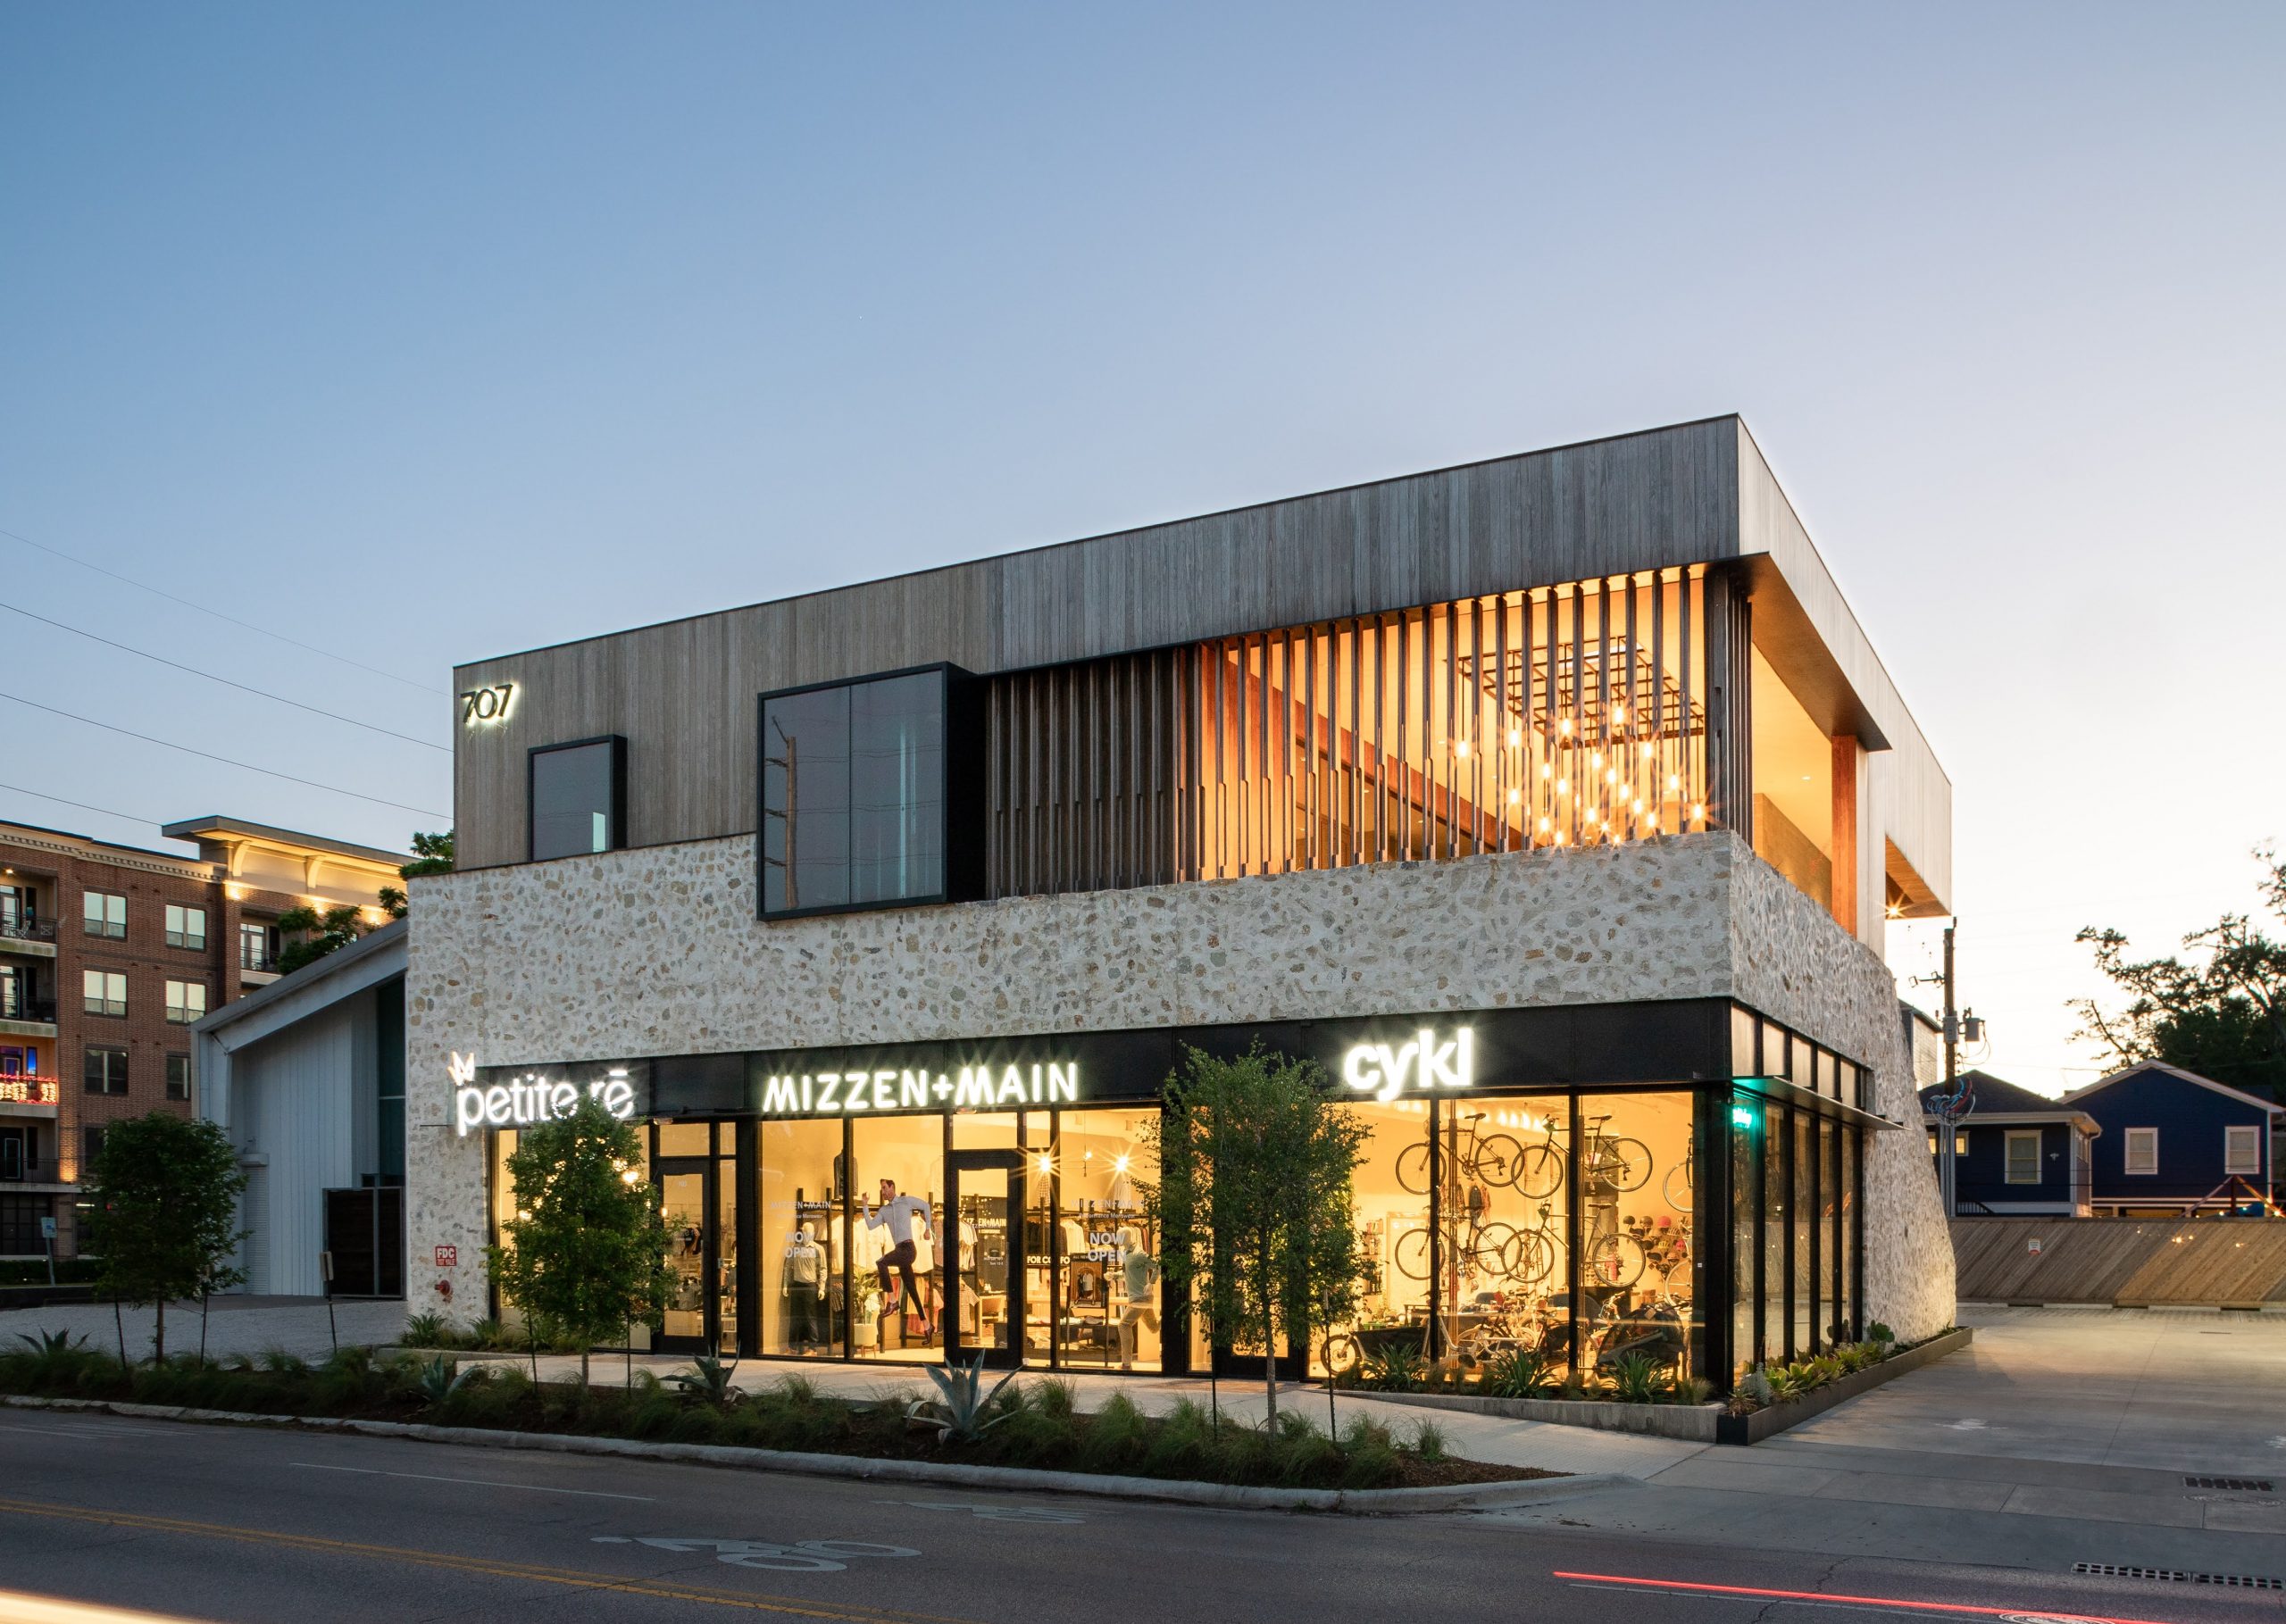 Outside view from the street of the 707 Yale Street Shops lit up at dusk in Houston Texas featuring Kebony modified wood clear cladding system